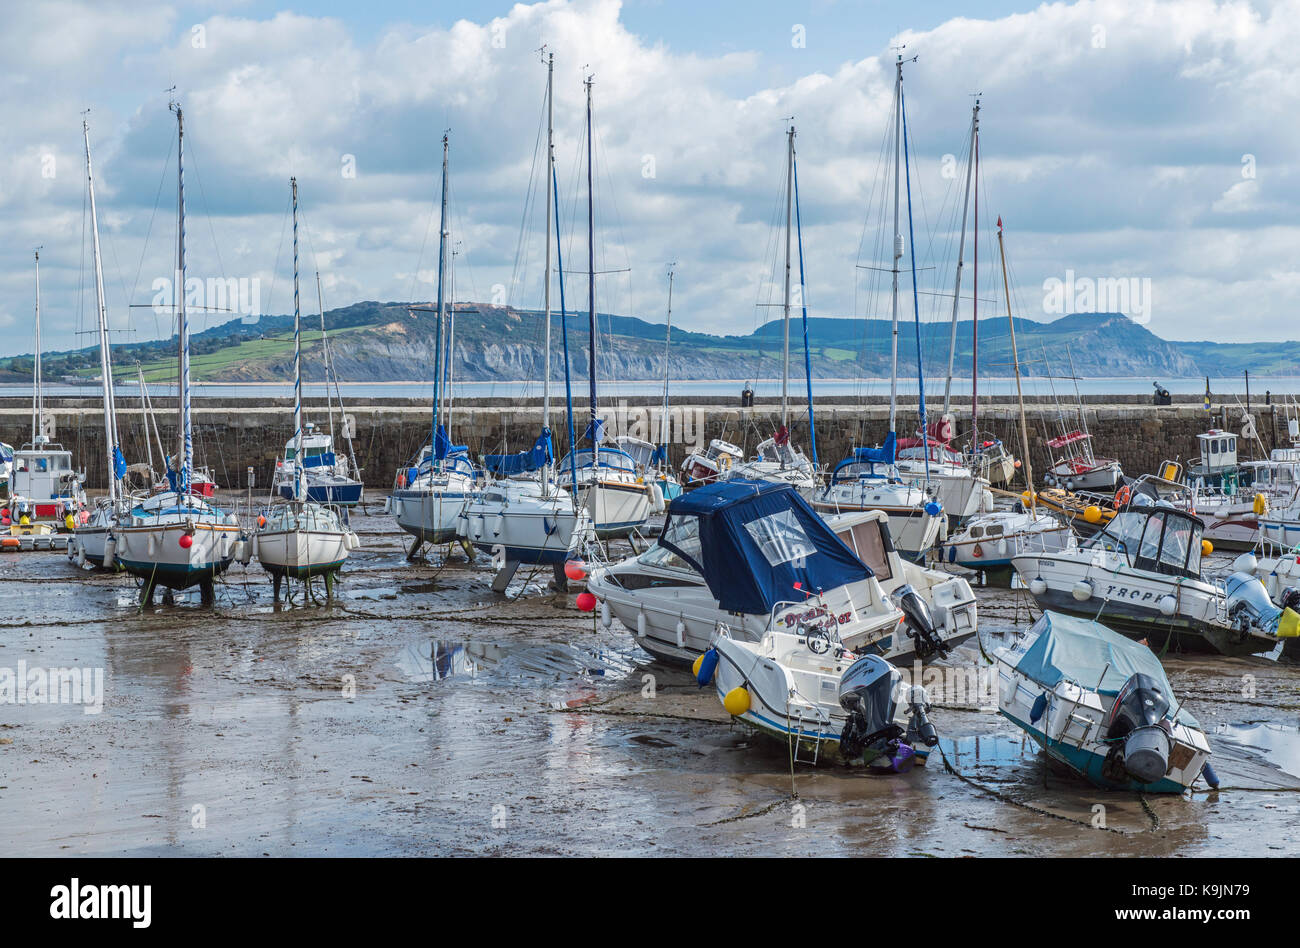 Lyme Regis, Coastal Town in Dorset south of England, showing the harbour full of moored boats at low tide Stock Photo